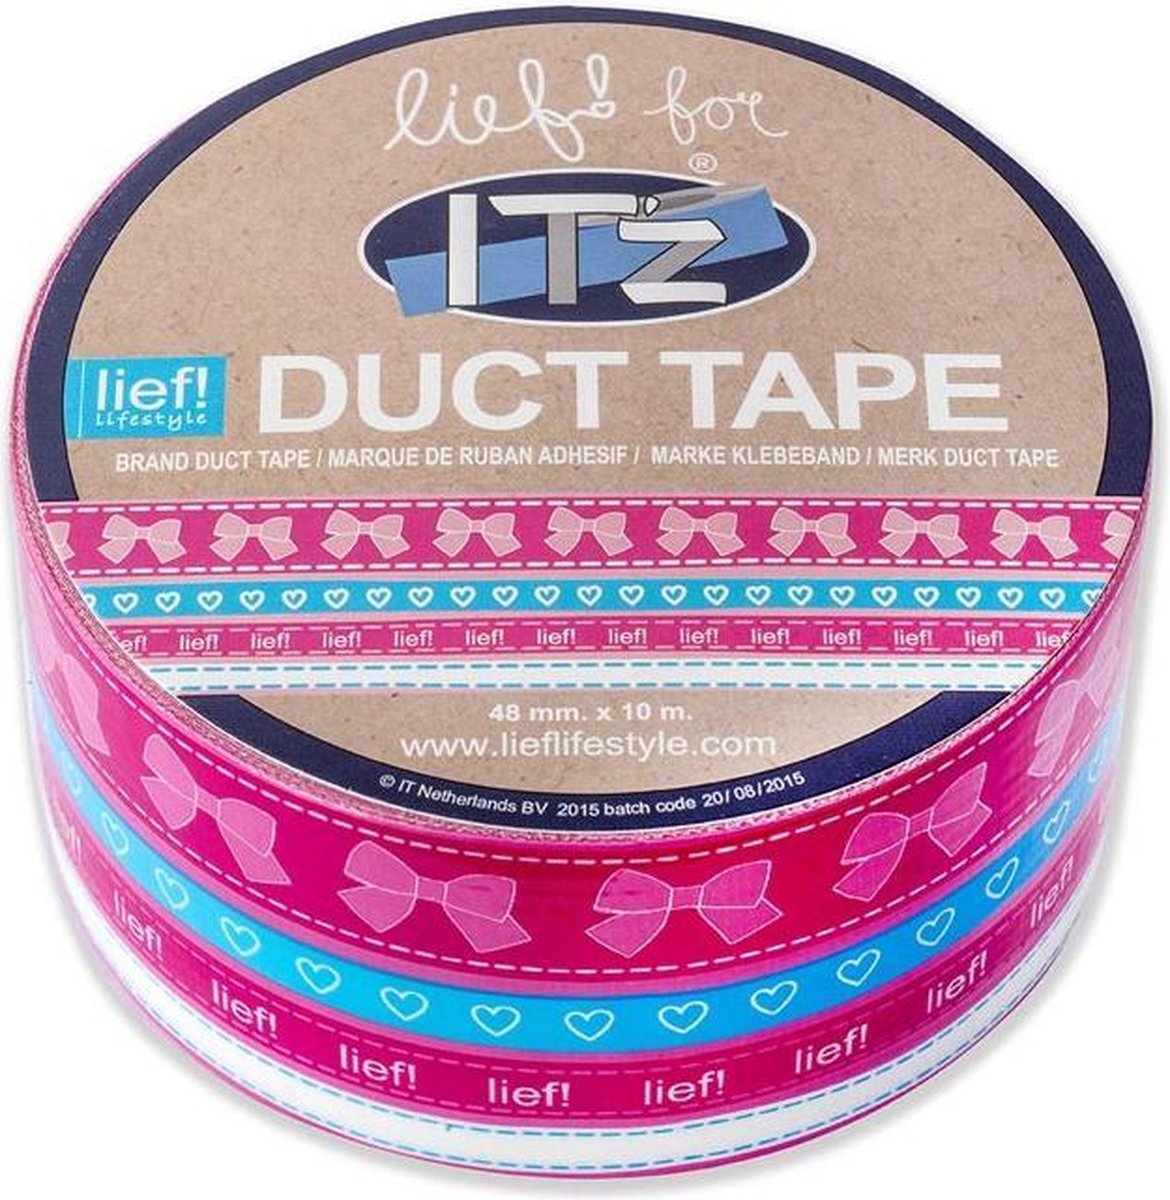 IT'z Duct Tape Lief Pink Girl